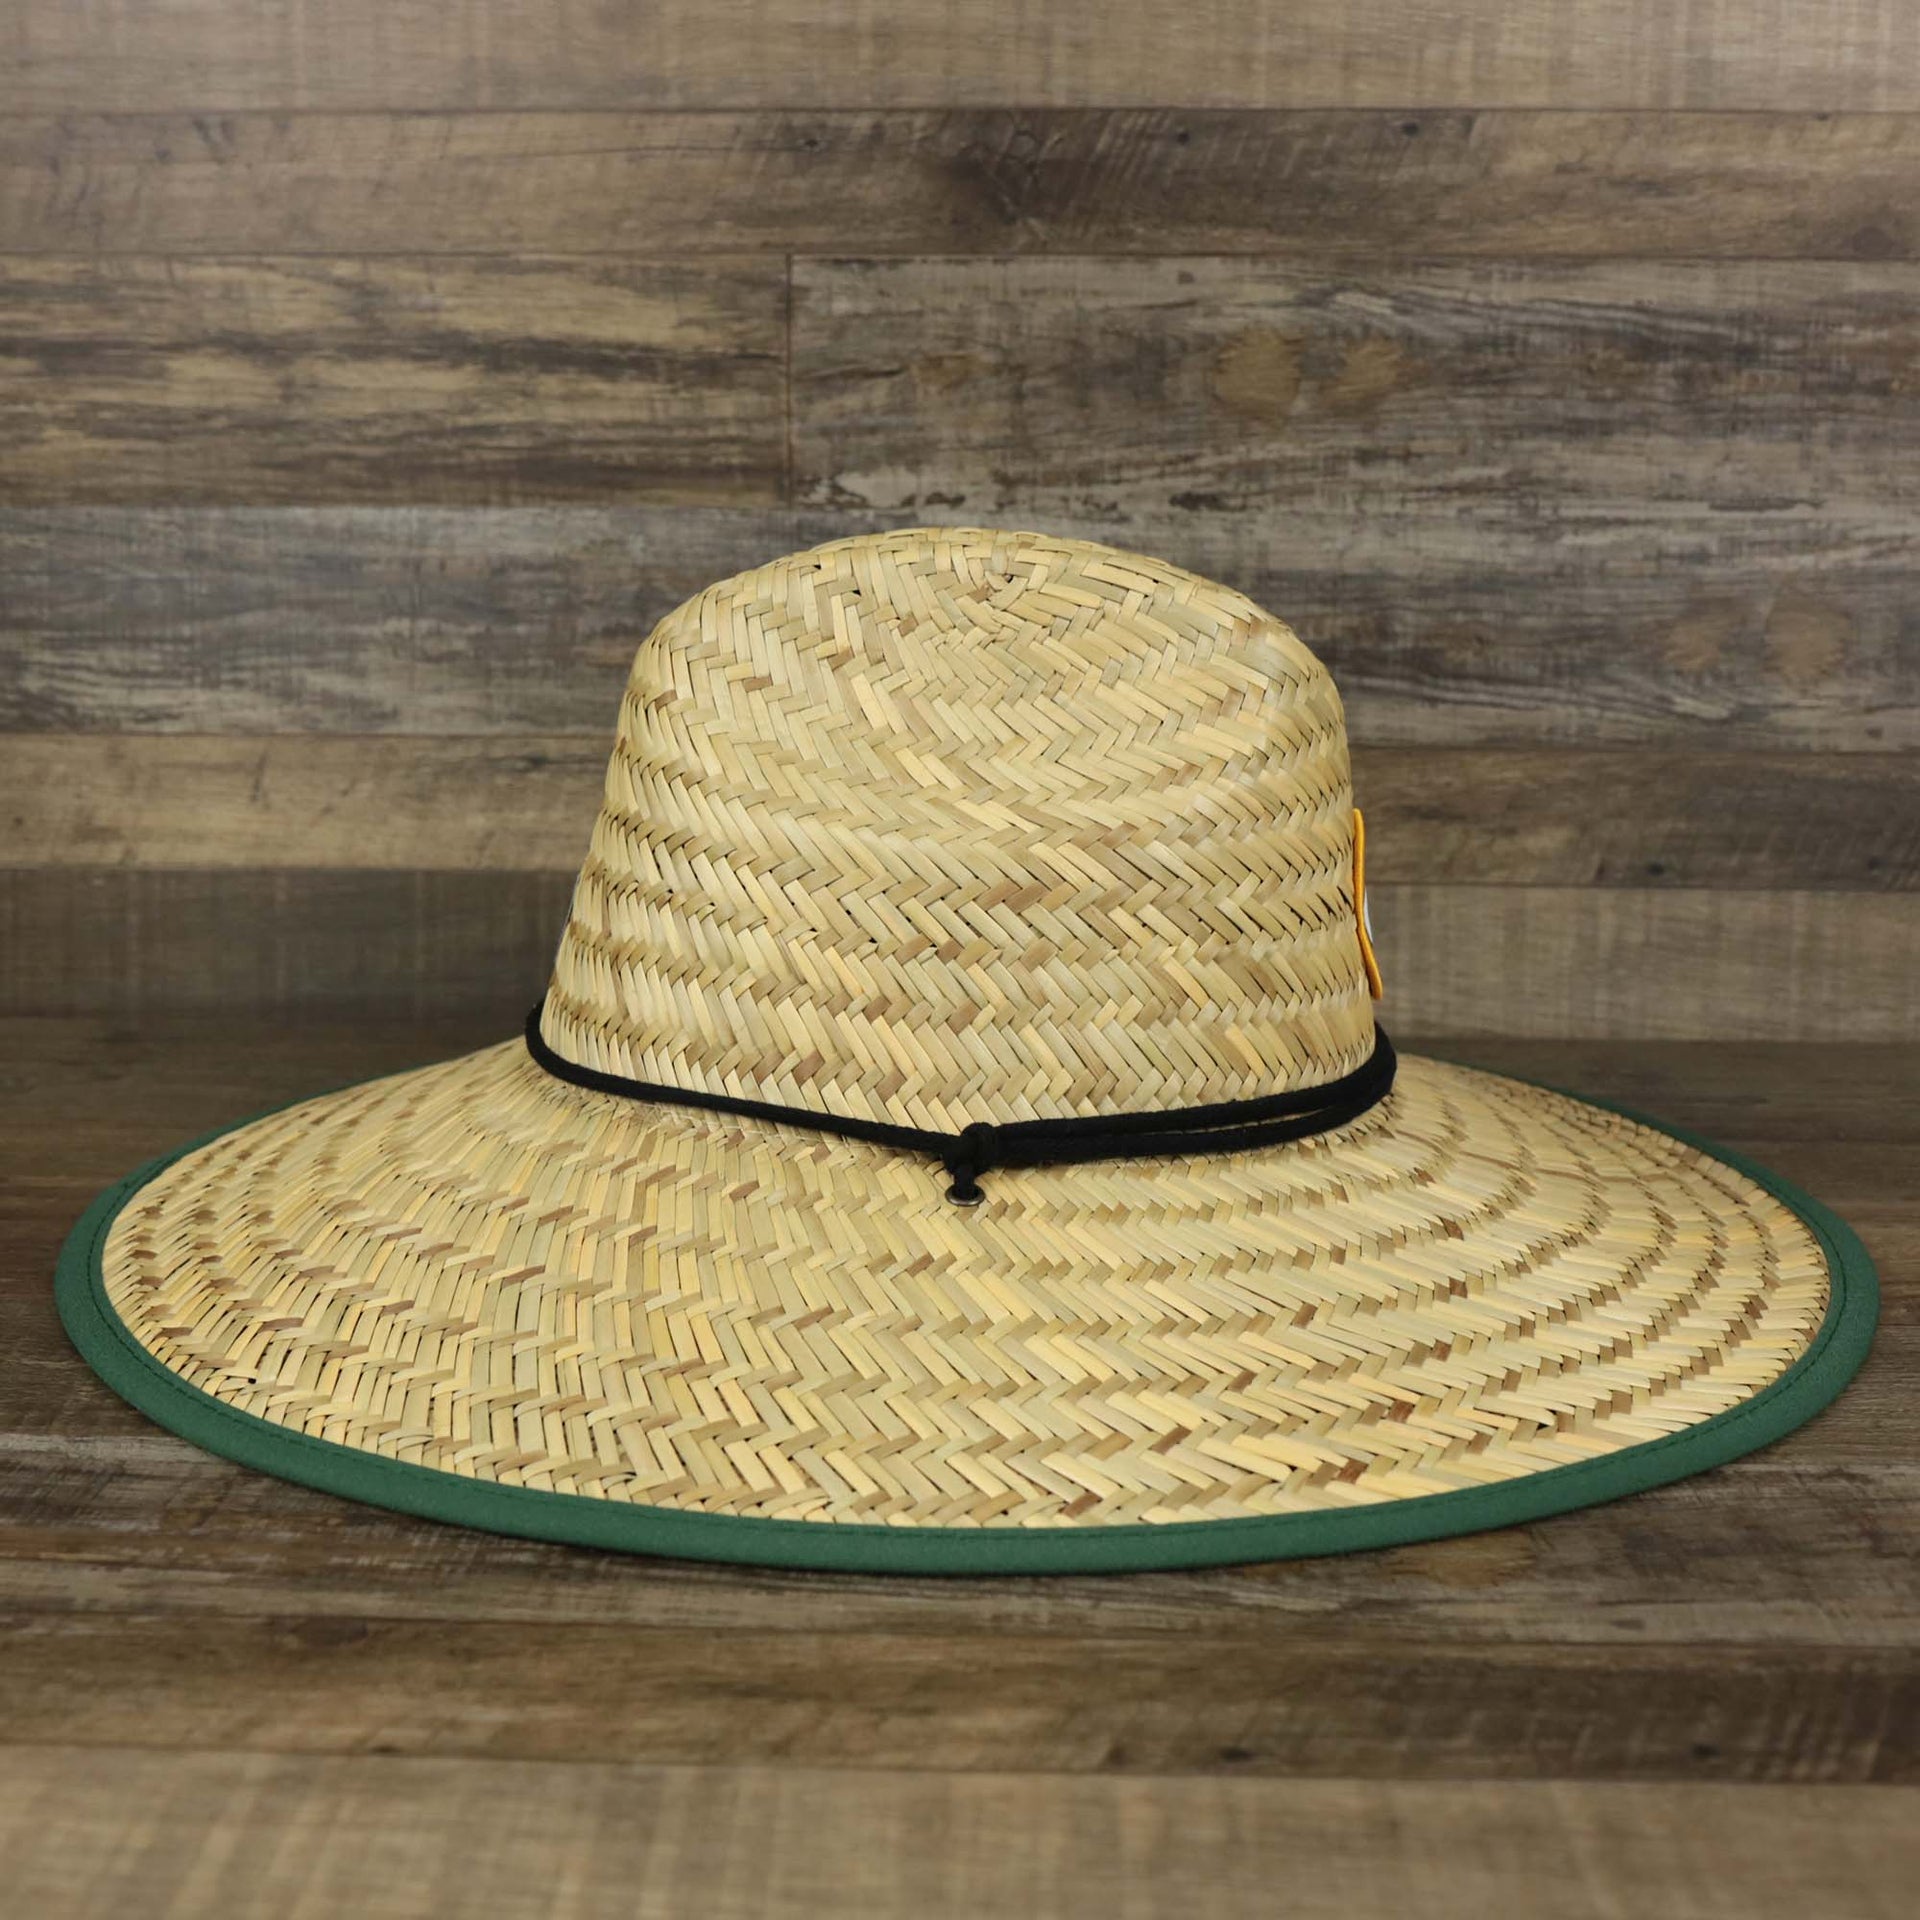 The wearer's right on the Green Bay Packers On Field 2020/2022 Summer Training Straw Hat | New Era OSFM